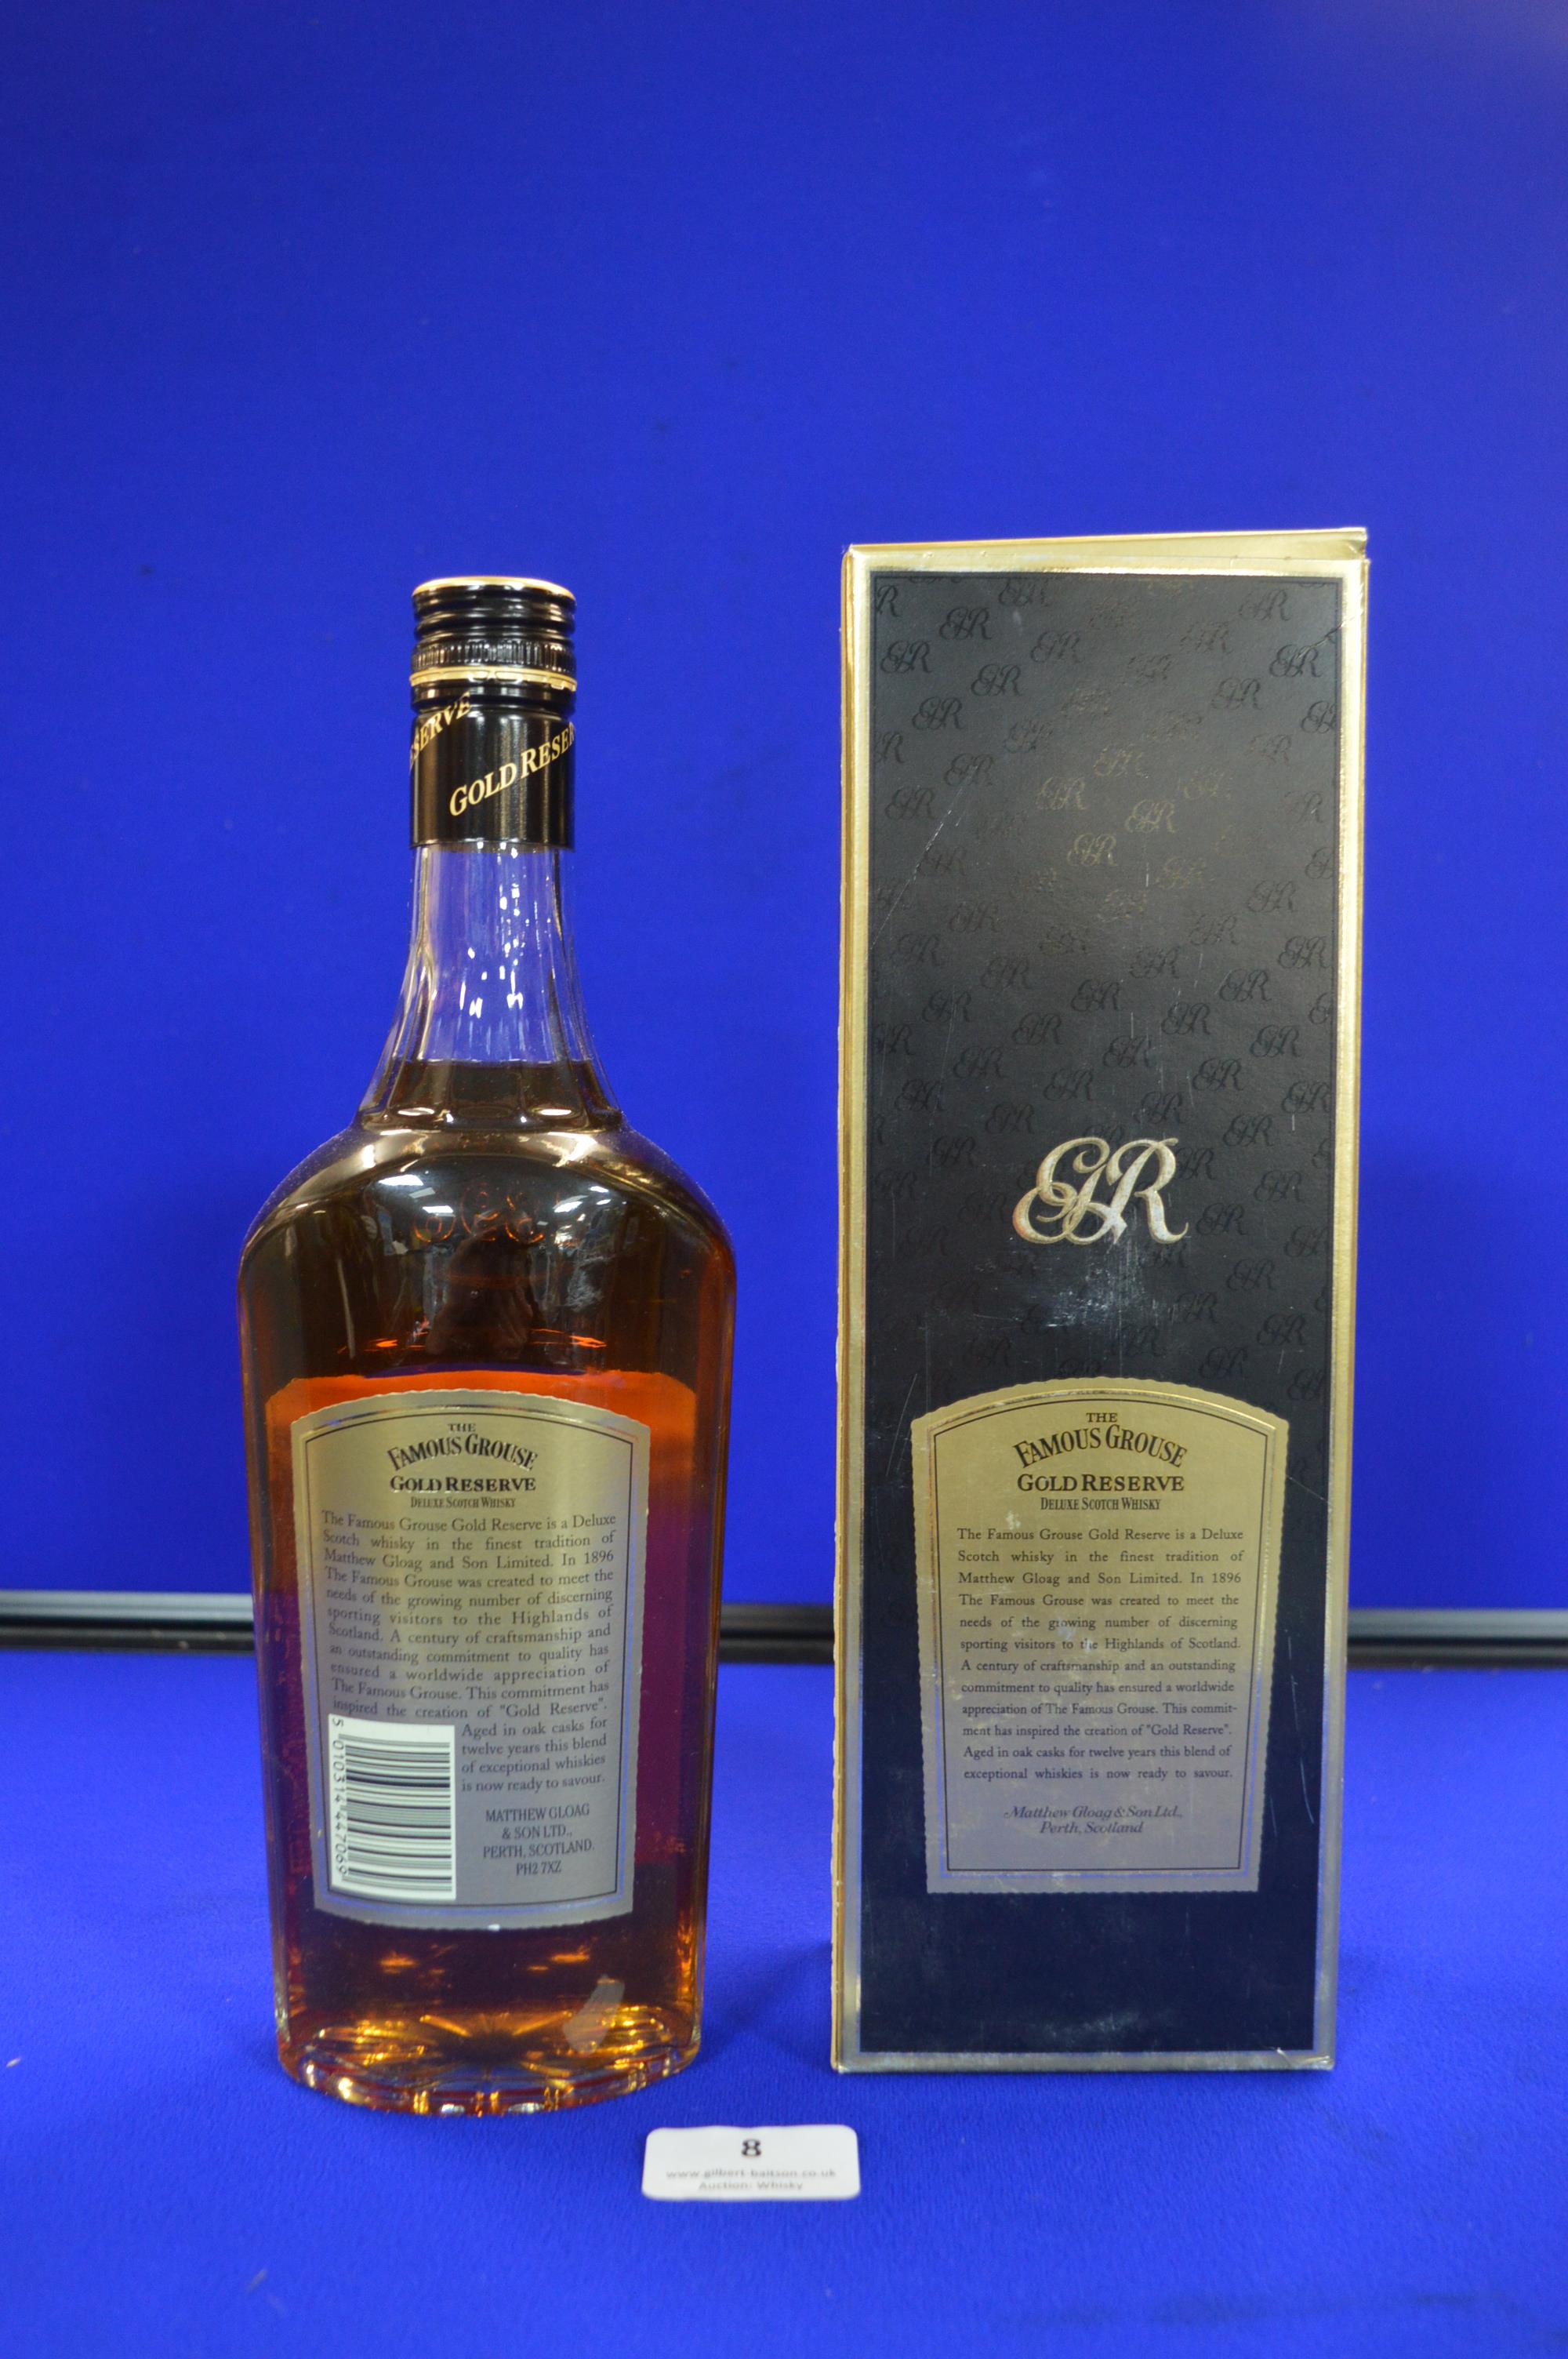 The Famous Grouse Gold Reserve Deluxe 12 Year Scotch Whisky - Image 2 of 2